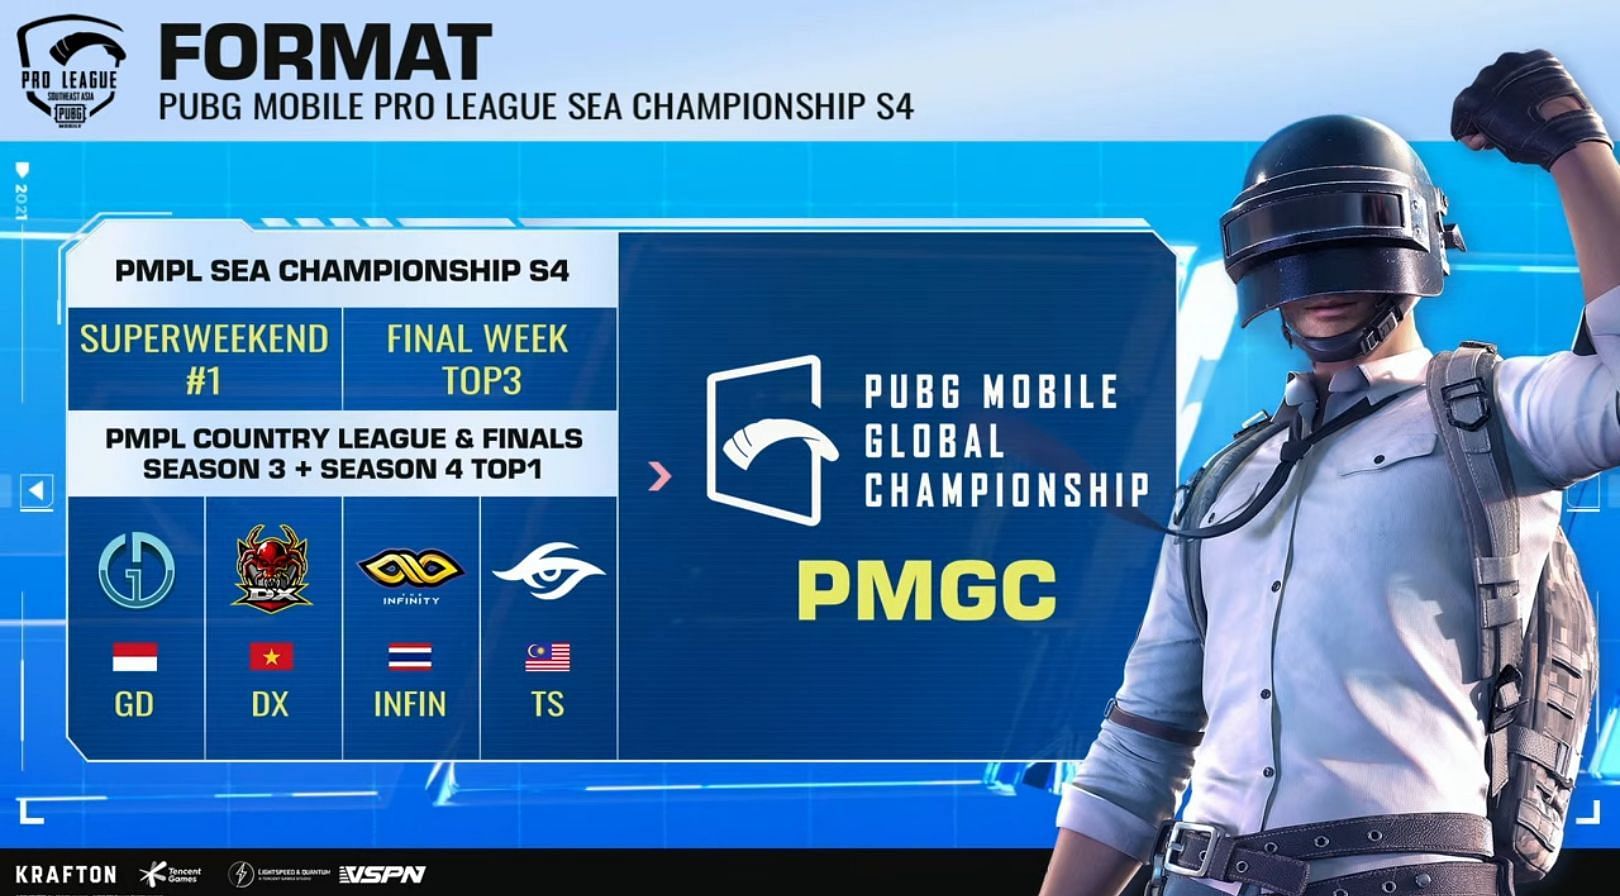 Top 3 teams from PMPL SEA Championship S4 finals will qualify for PMGC 2021 (Image via PUBG Mobile)